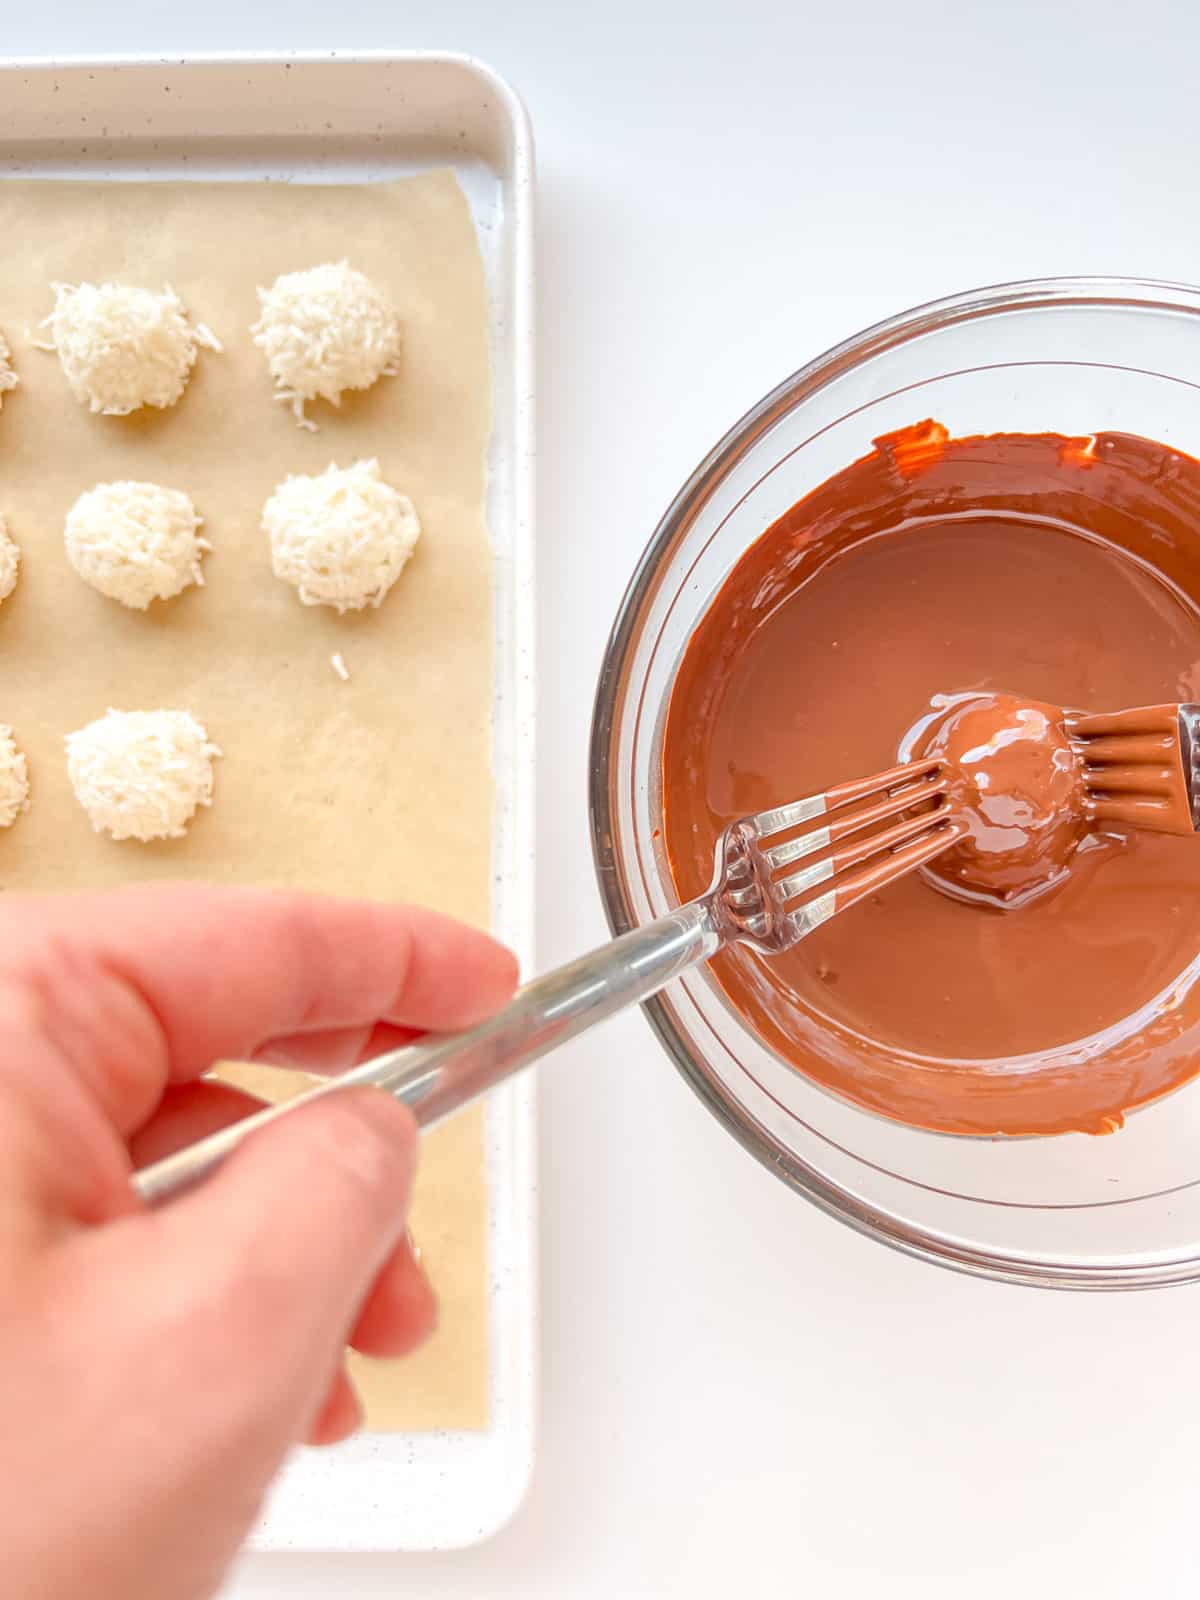 An image of the chilled coconut centres being dipped into a bowl of melted chocolate.